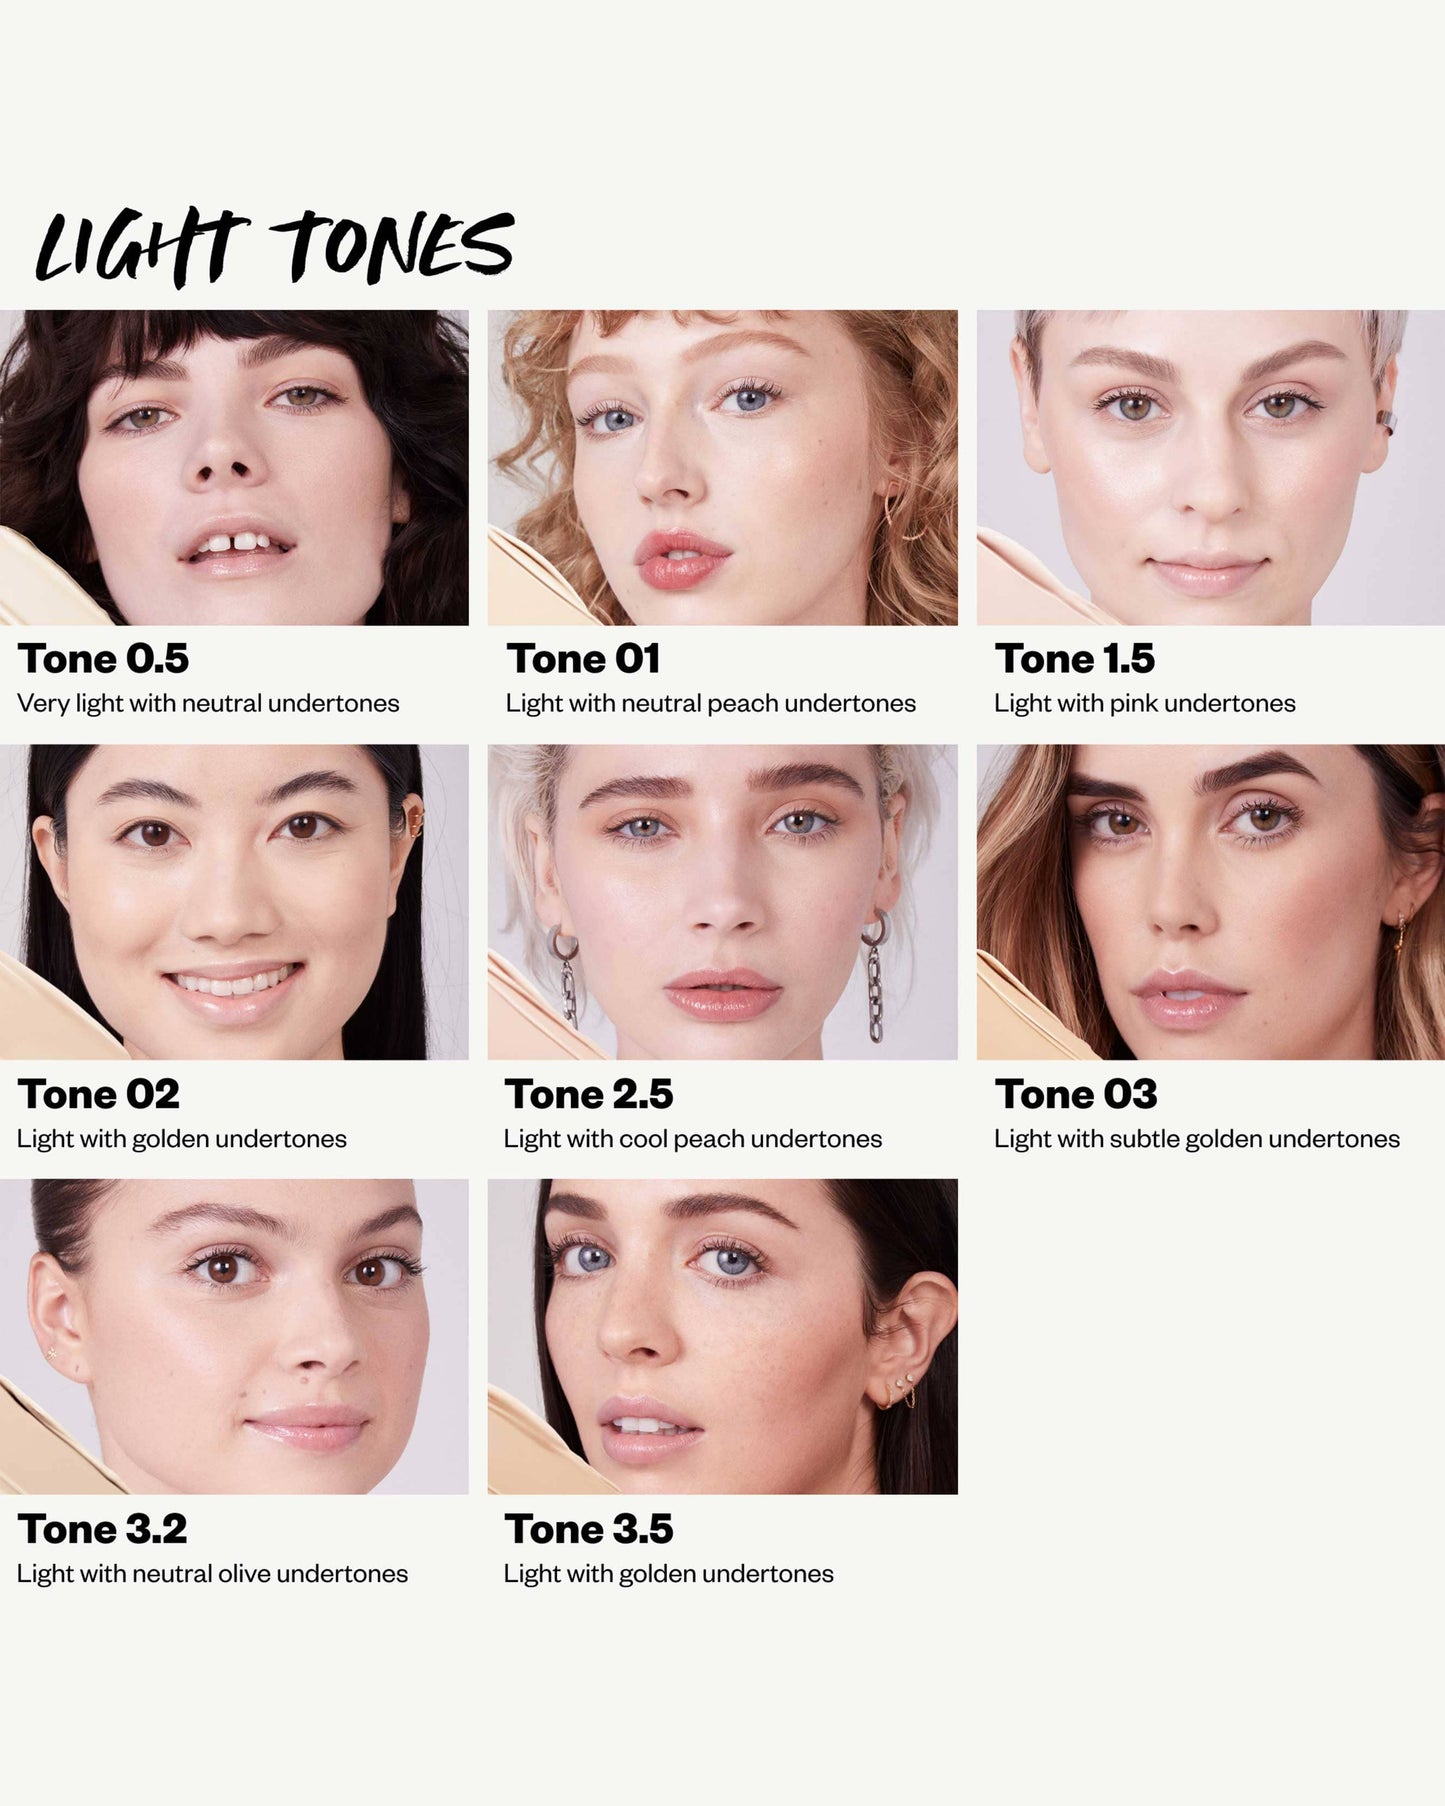 Tone 0.5 N (very light with neutral undertones)